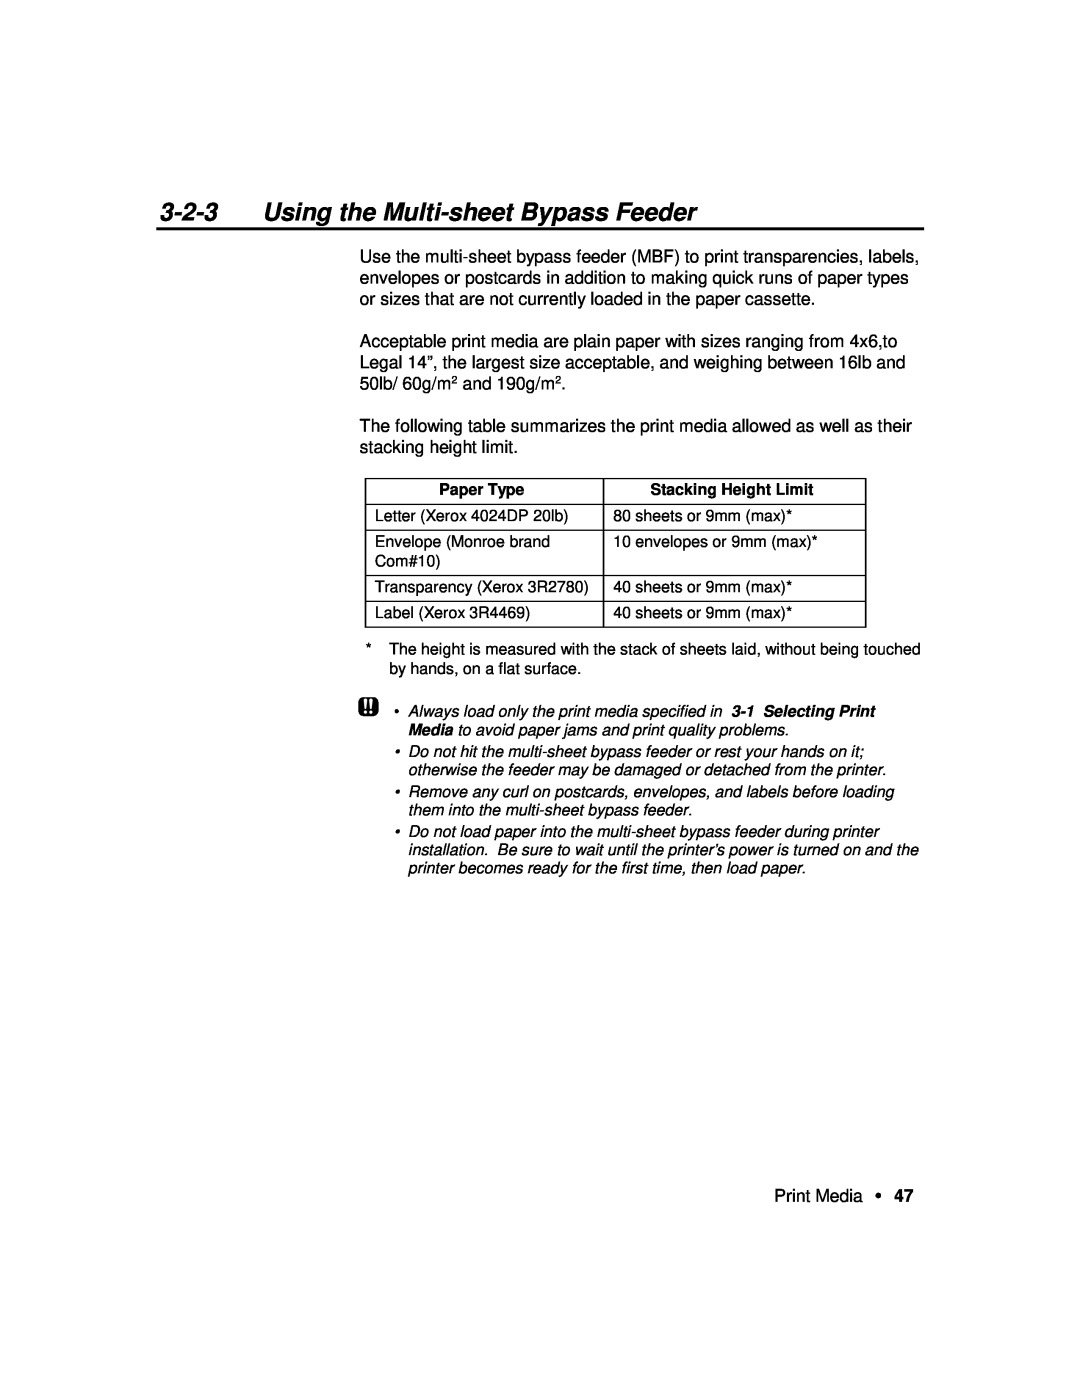 Xerox P12 manual Using the Multi-sheet Bypass Feeder, Paper Type, Stacking Height Limit 